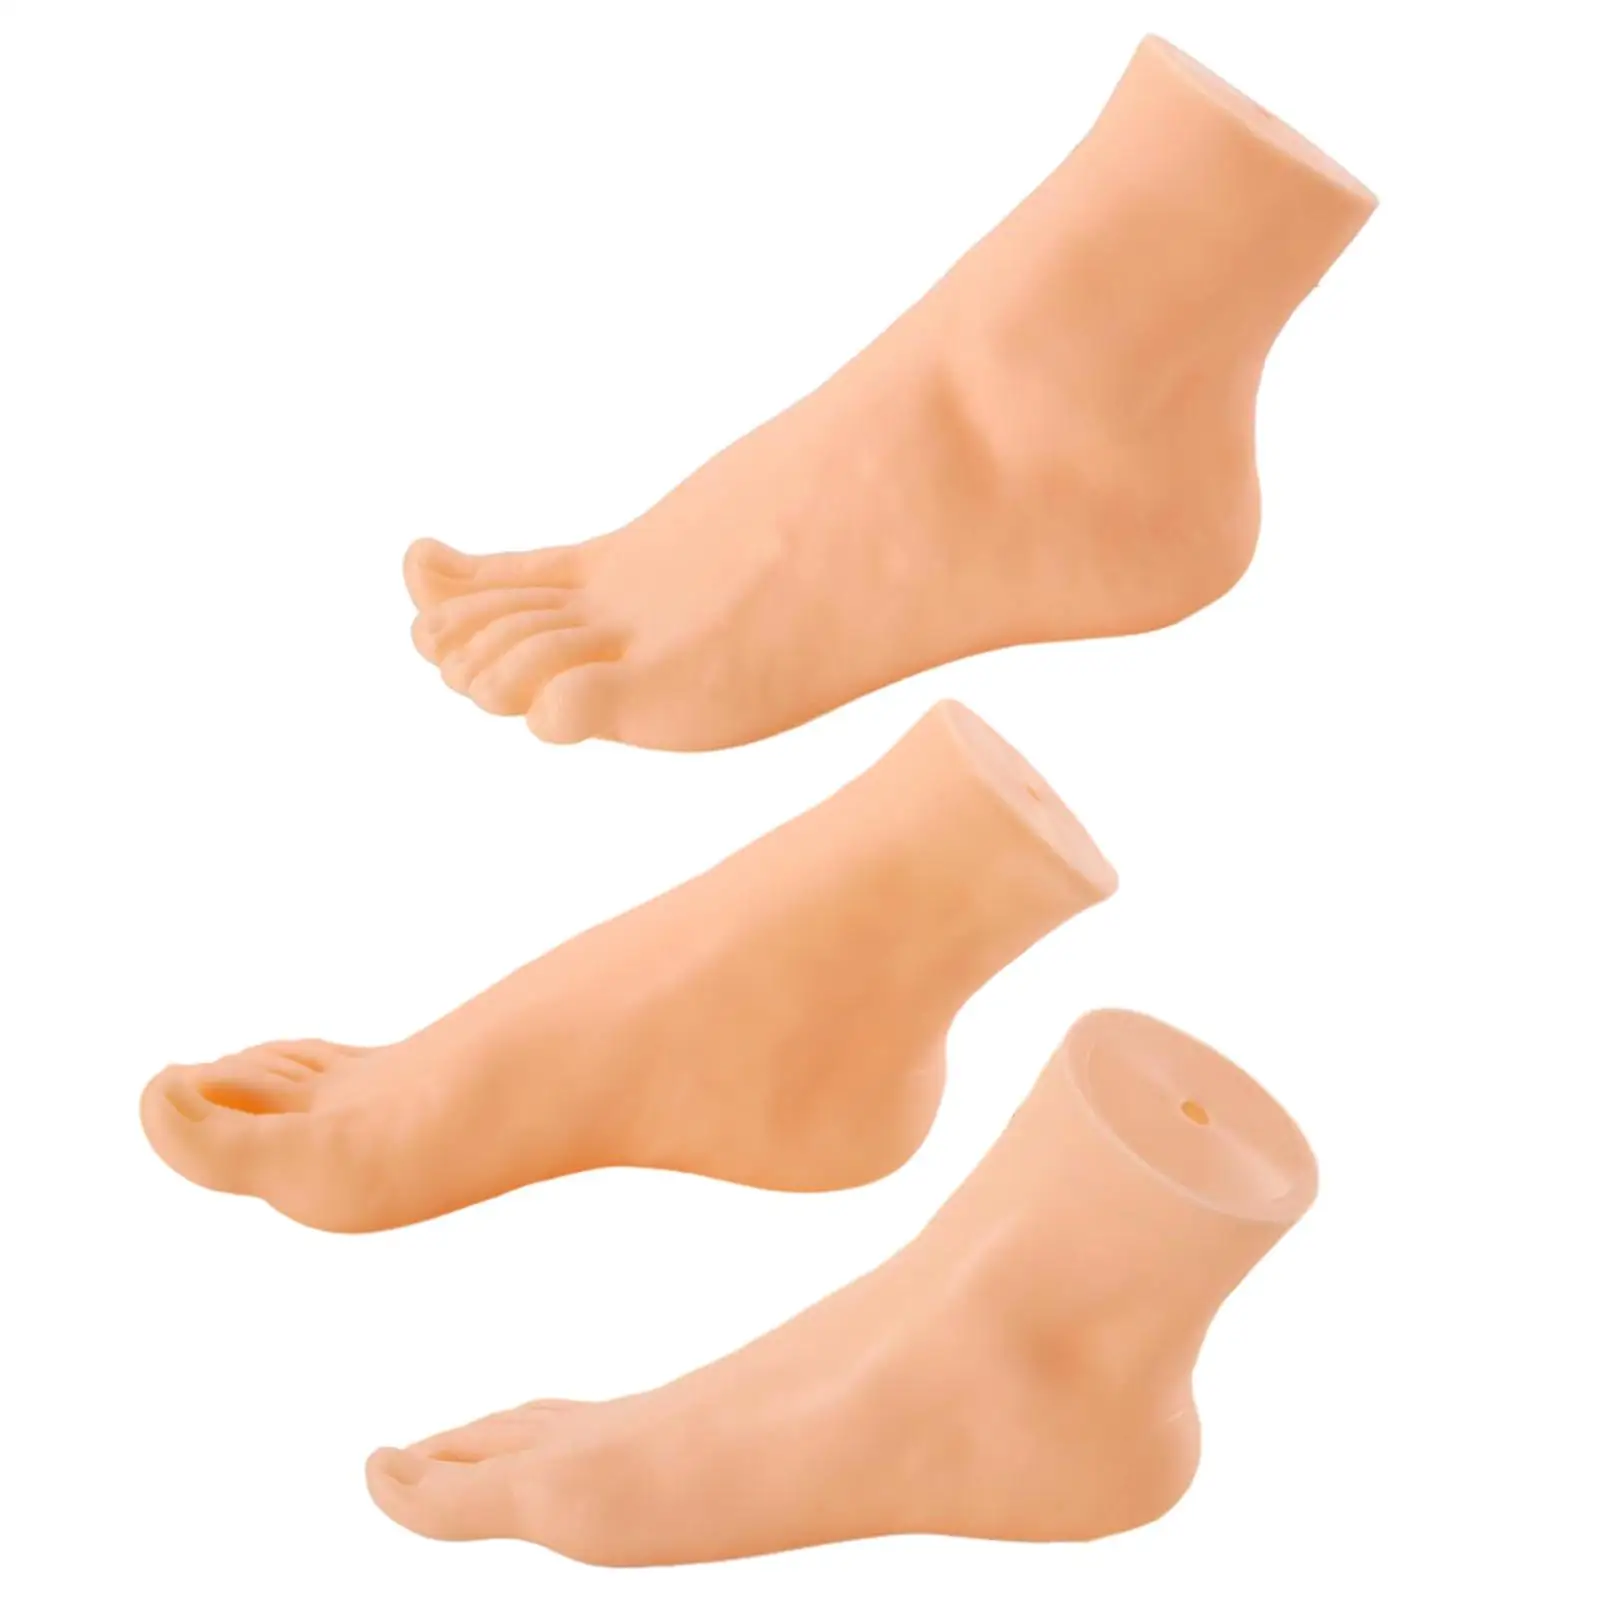 Foot Model Stand Tools Sock Display Prop Mannequin Foot Display Ankle Bracelet Shoes Sock Display for Retail Shop Chains